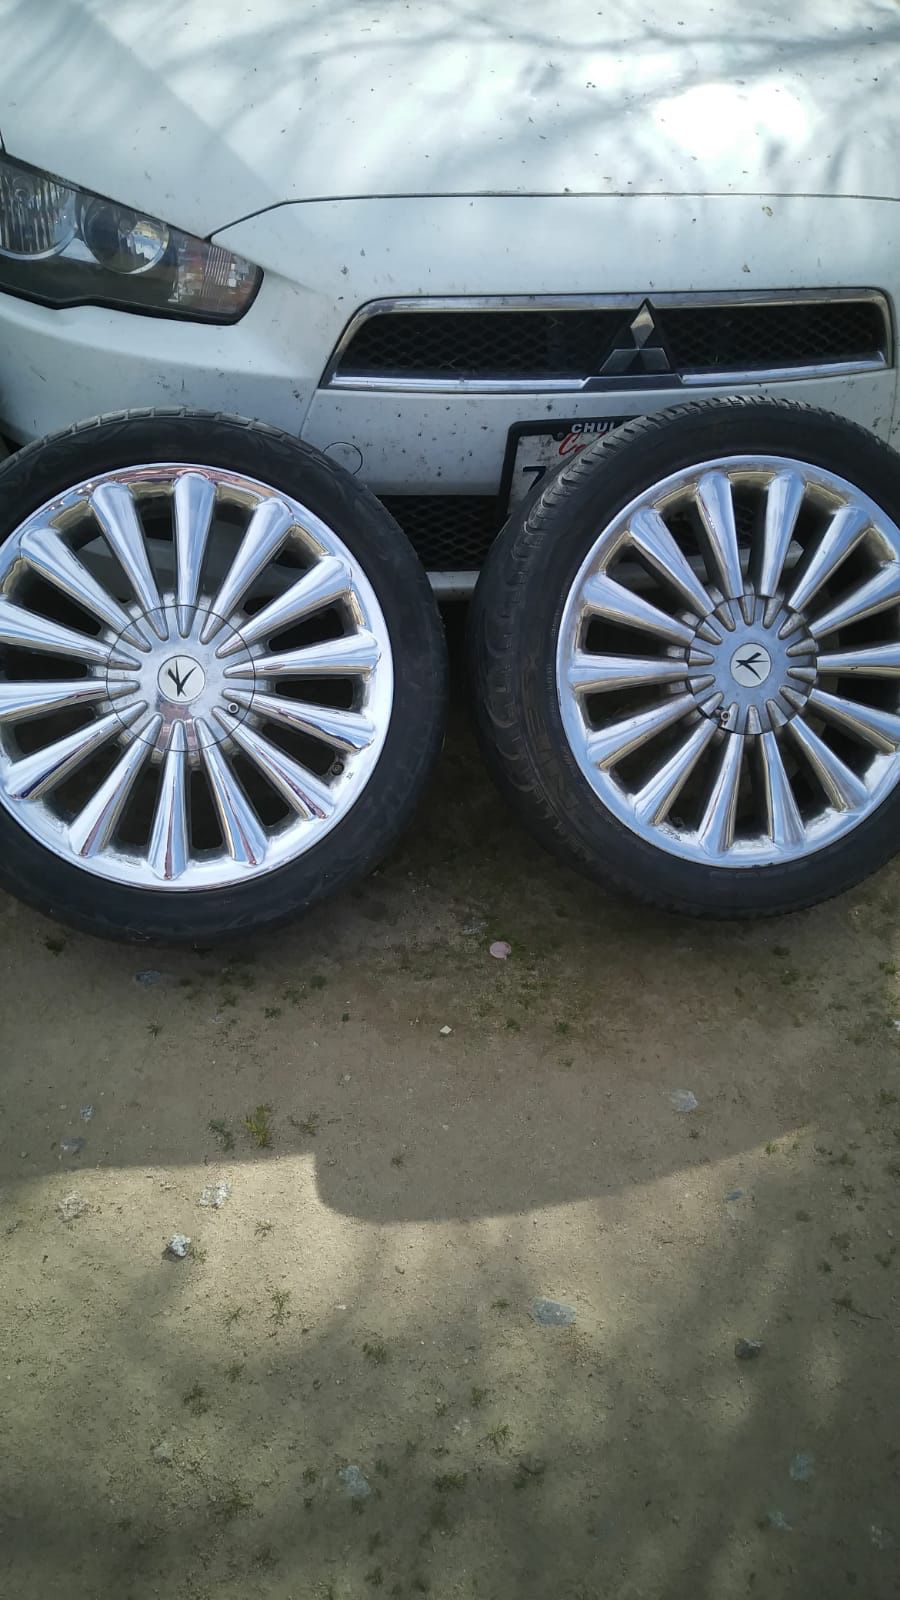 17” wheels came off of a Jetta